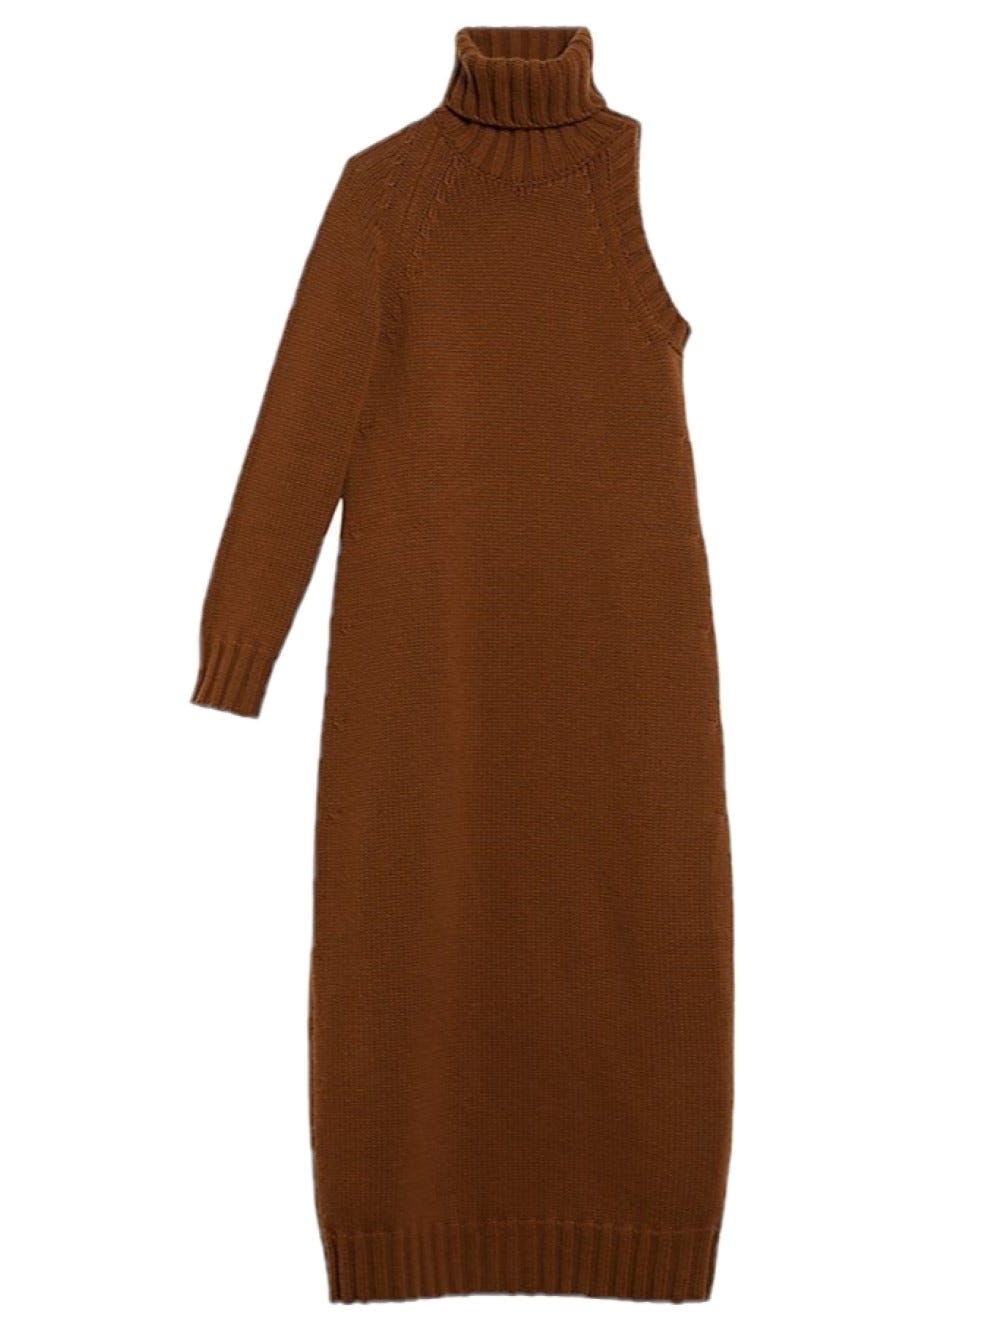 MAX MARA BROWN WOOL AND CASHMERE ONE-SHOULDER DRESS